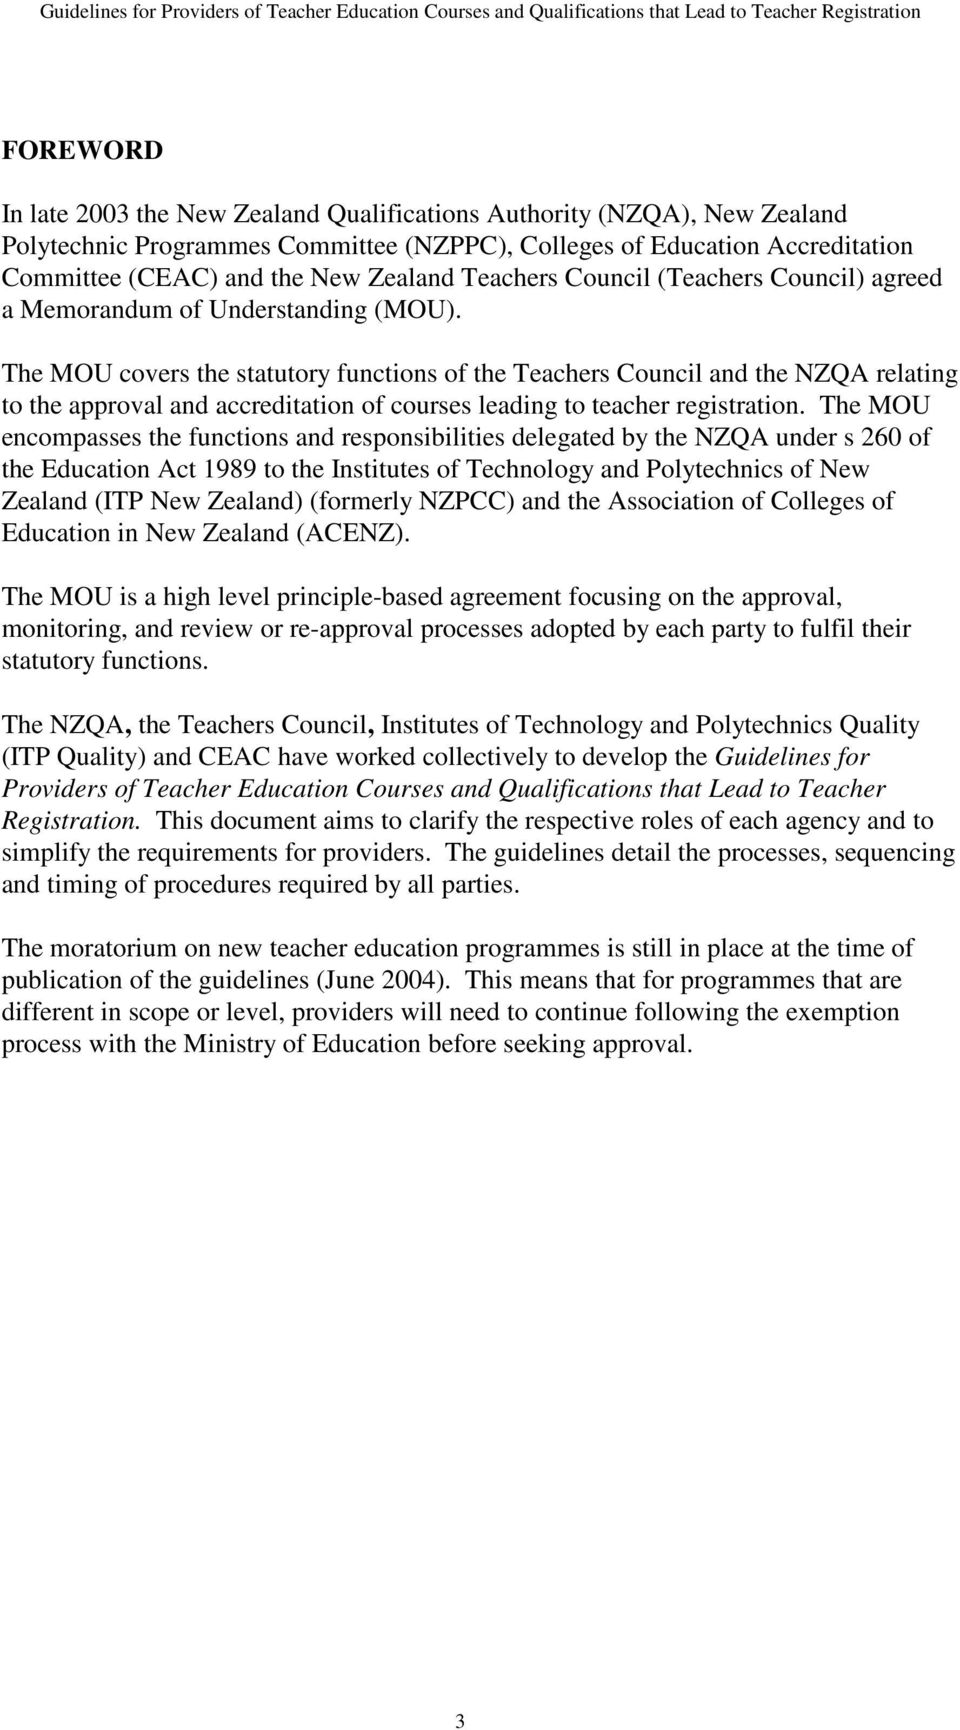 The MOU covers the statutory functions of the Teachers Council and the NZQA relating to the approval and accreditation of courses leading to teacher registration.